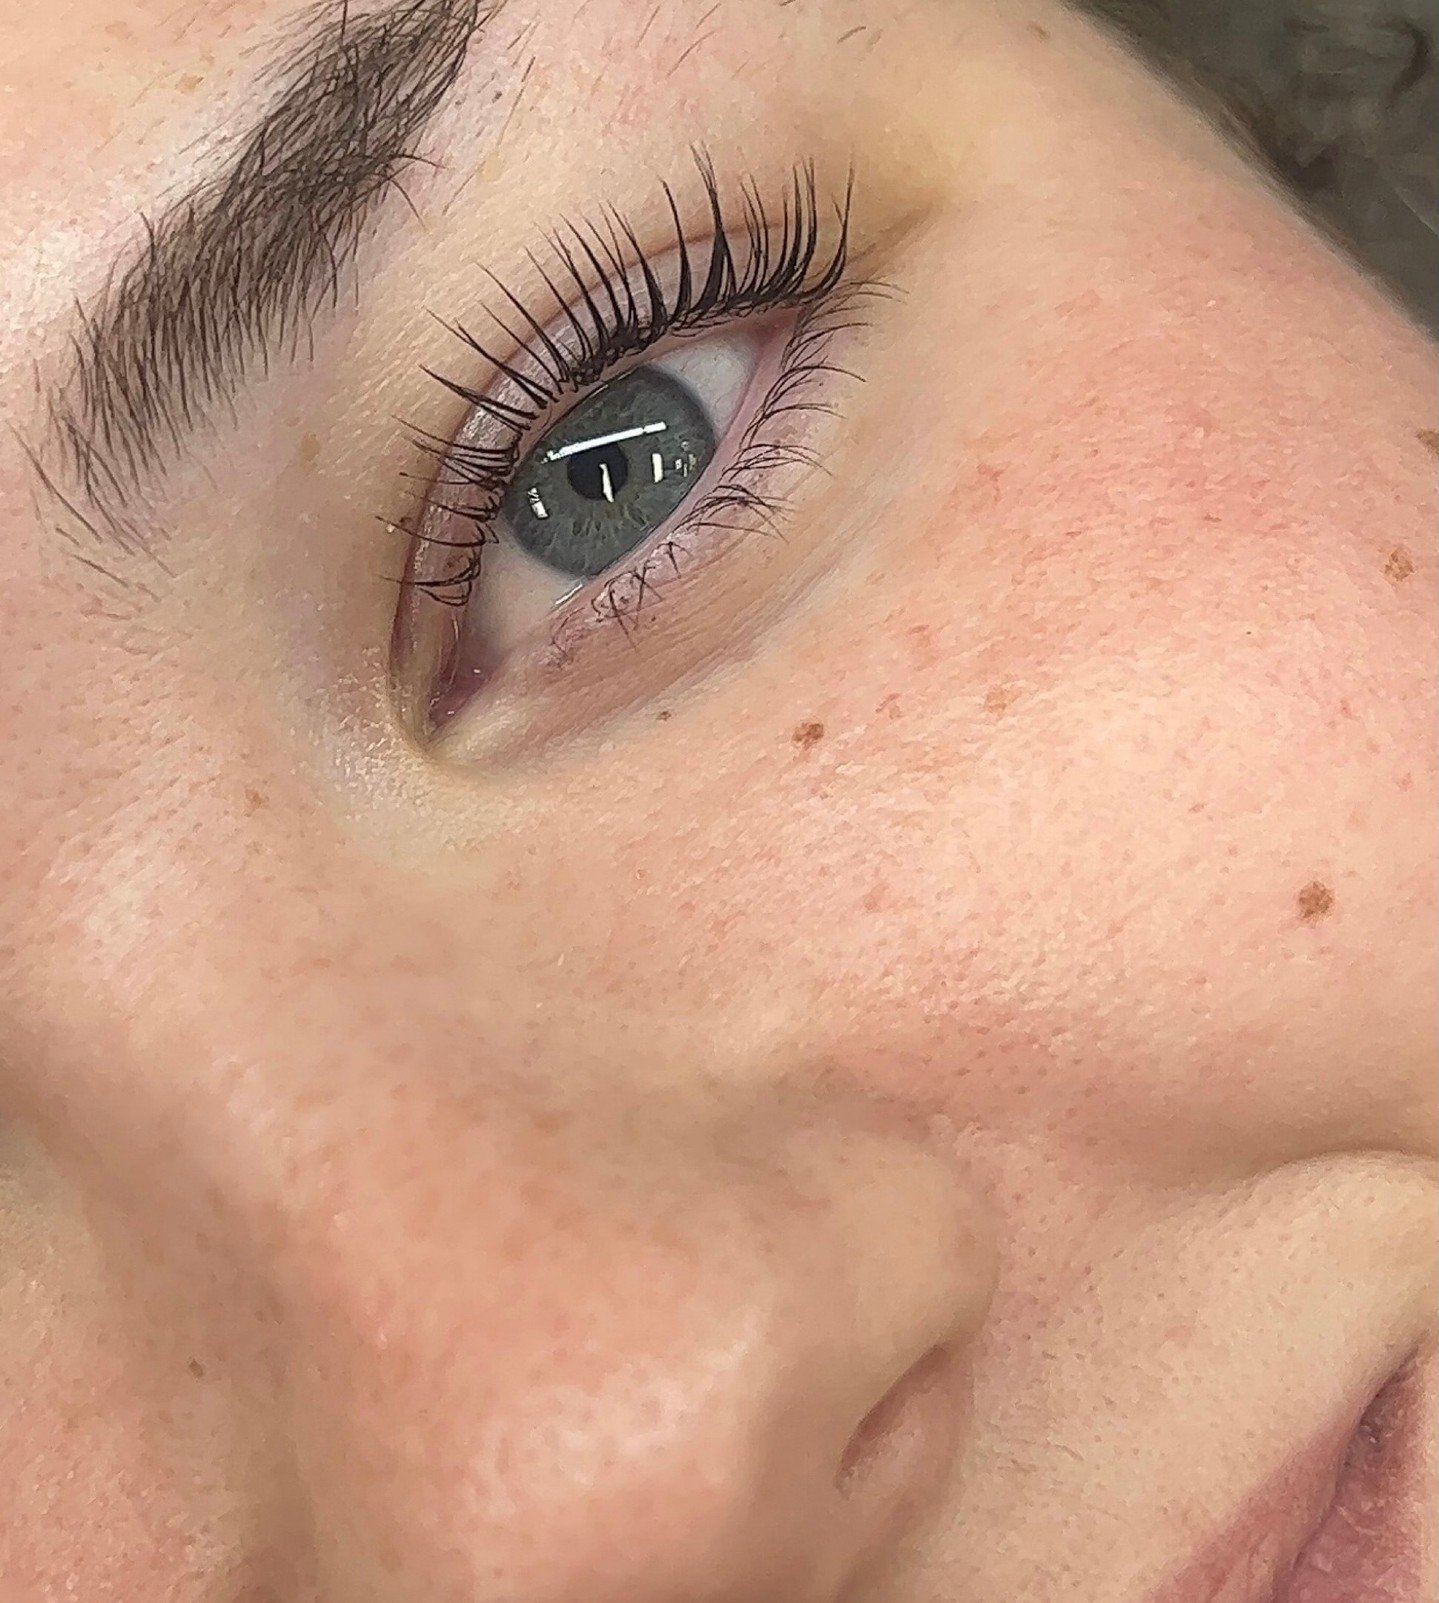 Check out this lash lift and tint transformation! Say goodbye to mascara struggles and hello to effortlessly bold lashes that pop. Get ready to flaunt your fabulous new look and slay all day, beauty! 

Artist: Andrea
Service: Lash Lift + tint
#LashGa